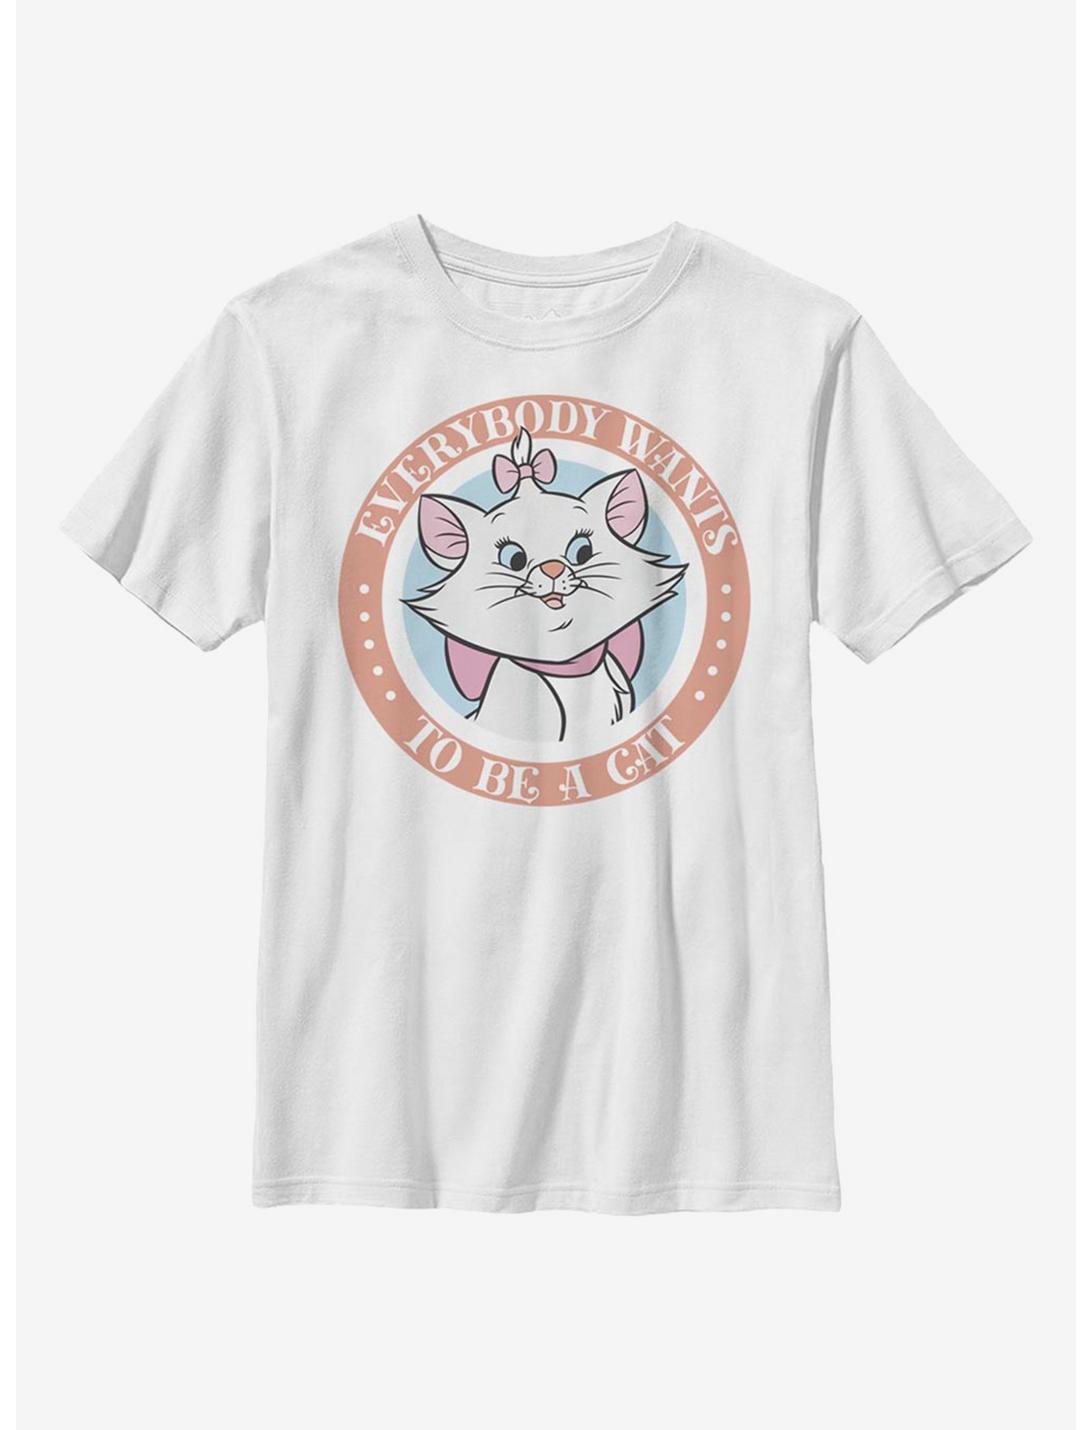 Disney Aristocats Finish Fights Youth T-Shirt, WHITE, hi-res